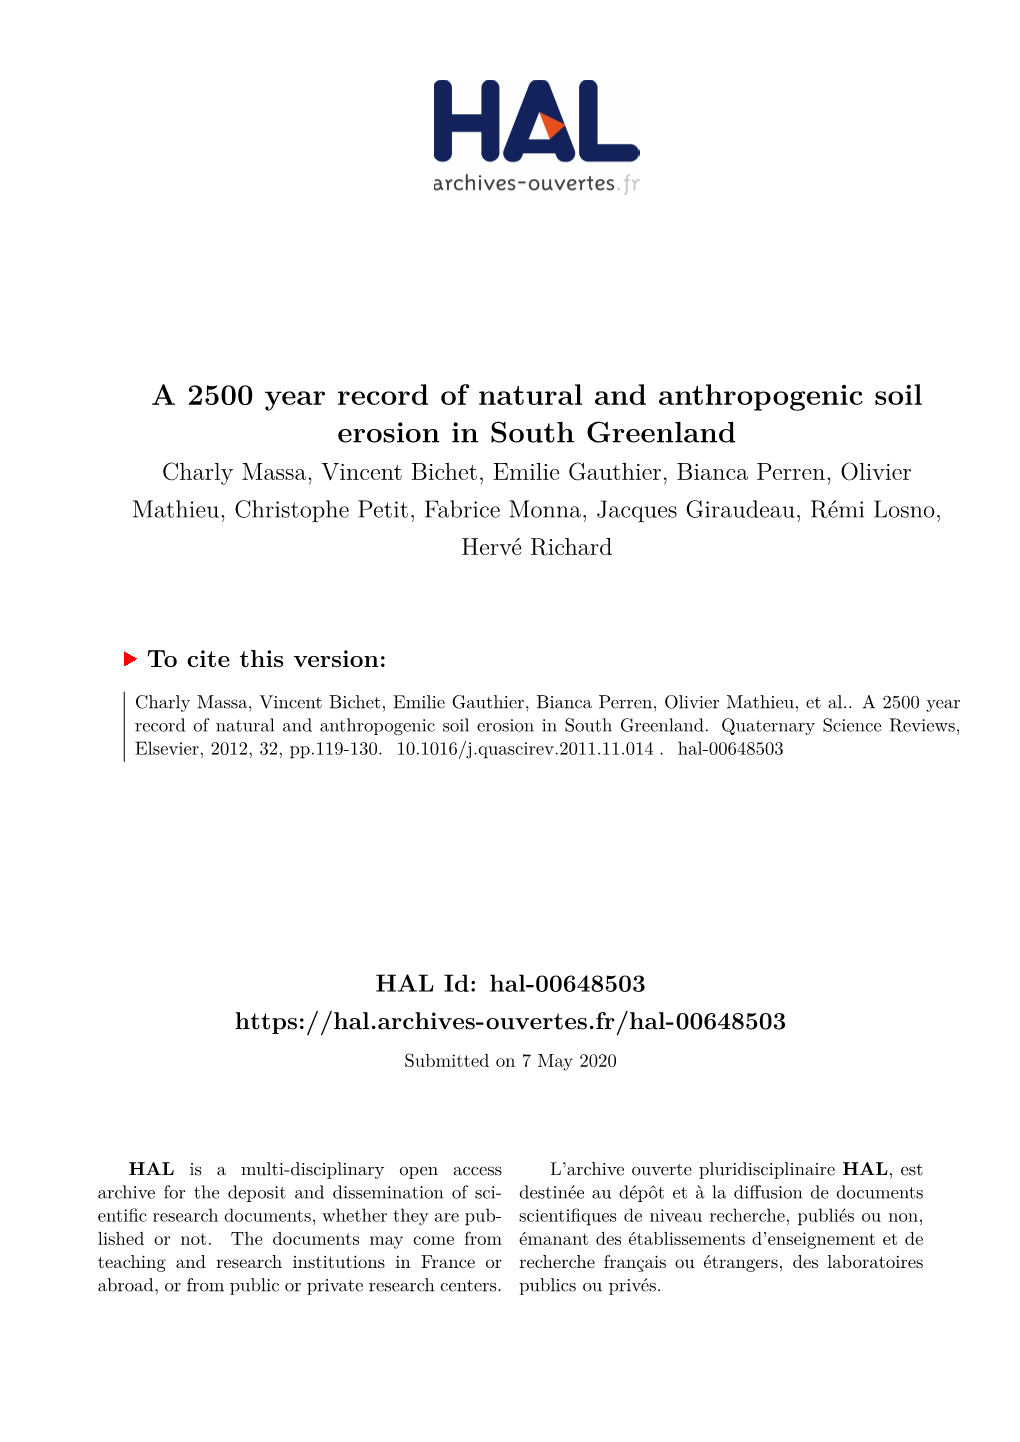 A 2500 Year Record of Natural and Anthropogenic Soil Erosion in South